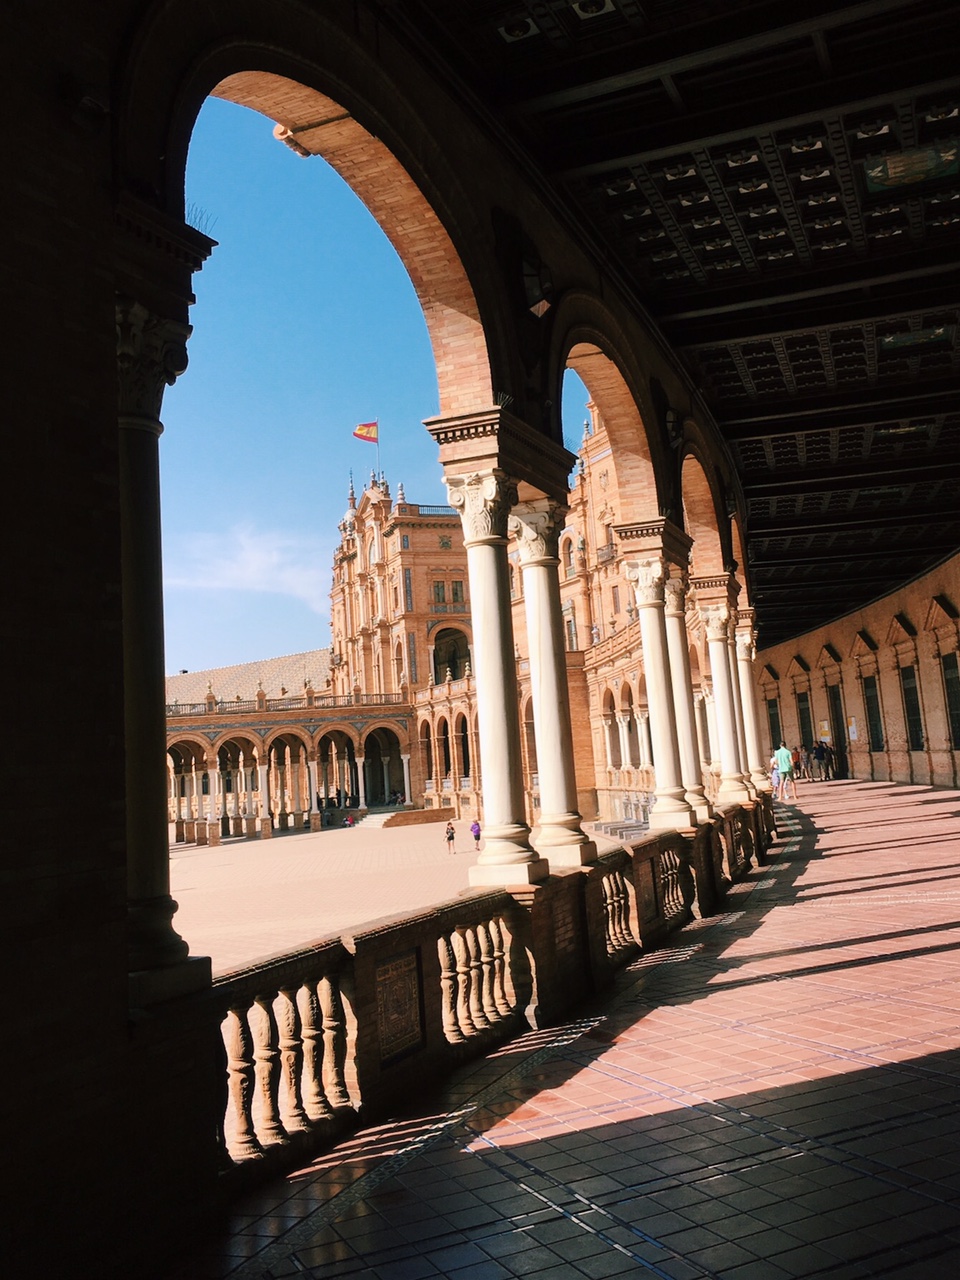 Plaza España, a great structure that shows mosaic compositions of all the provinces of Spain.